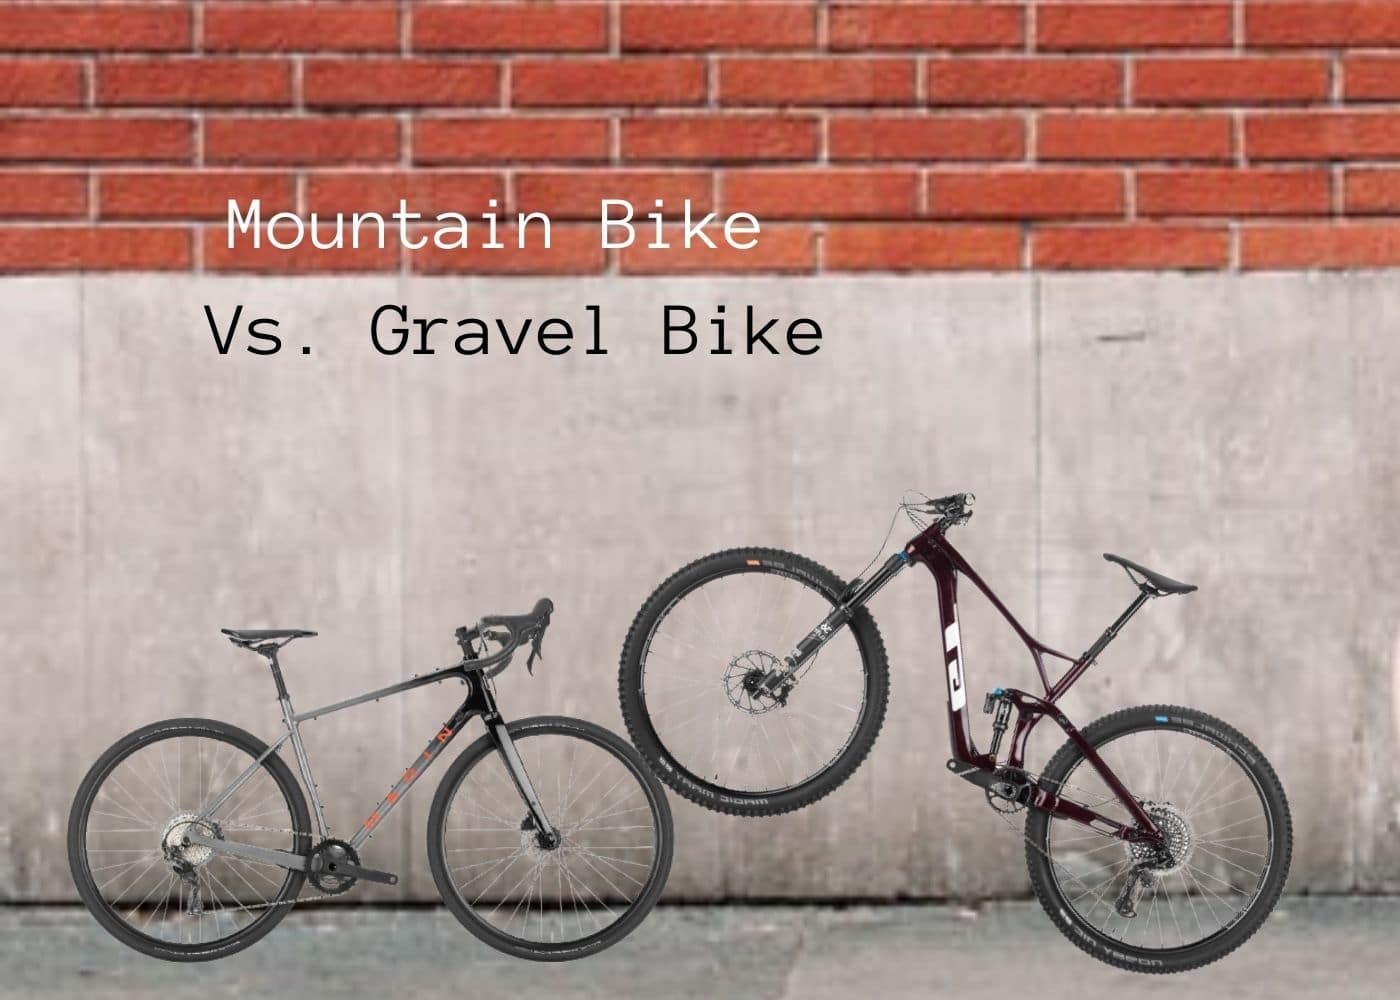 Featured image for the Mountain Bike vs Gravel Bike article